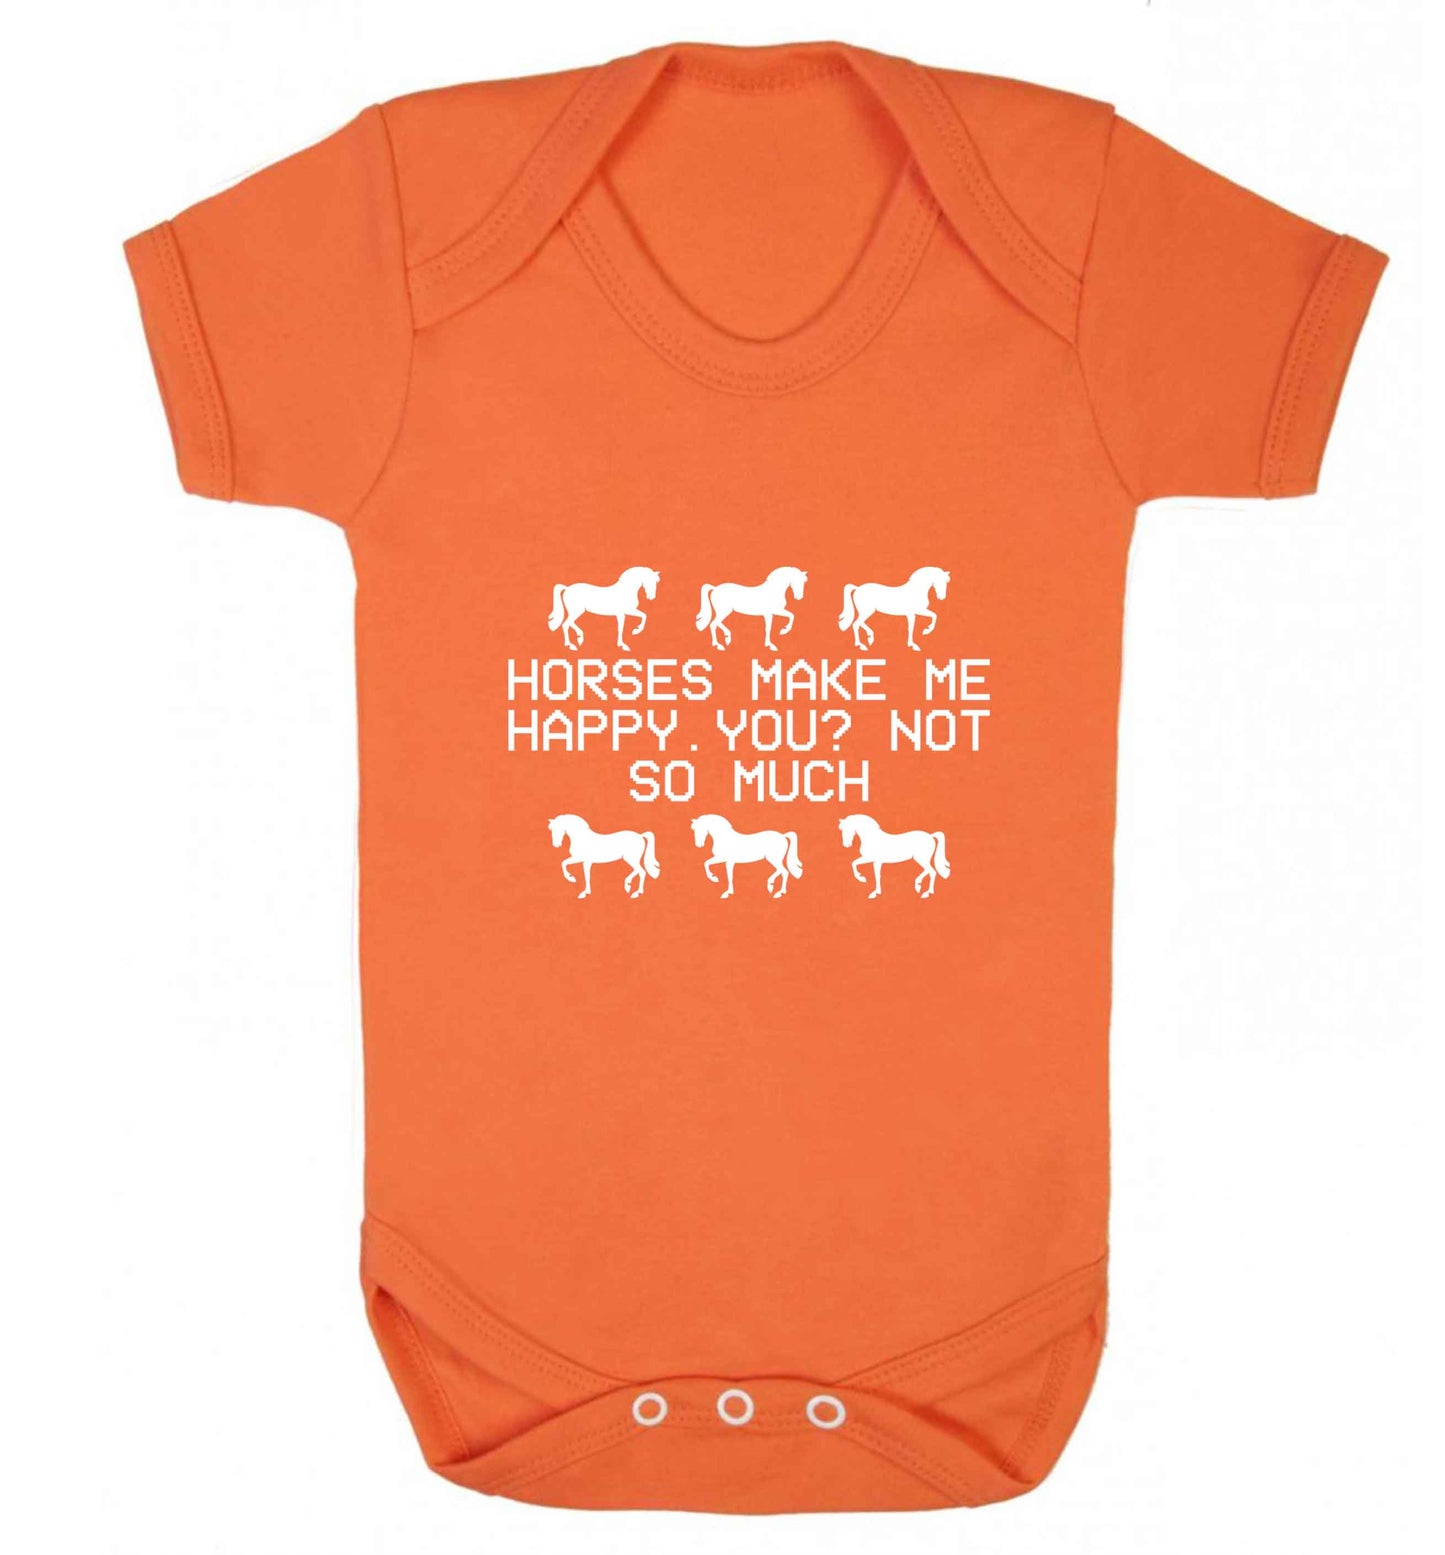 Horses make me happy, you not so much baby vest orange 18-24 months